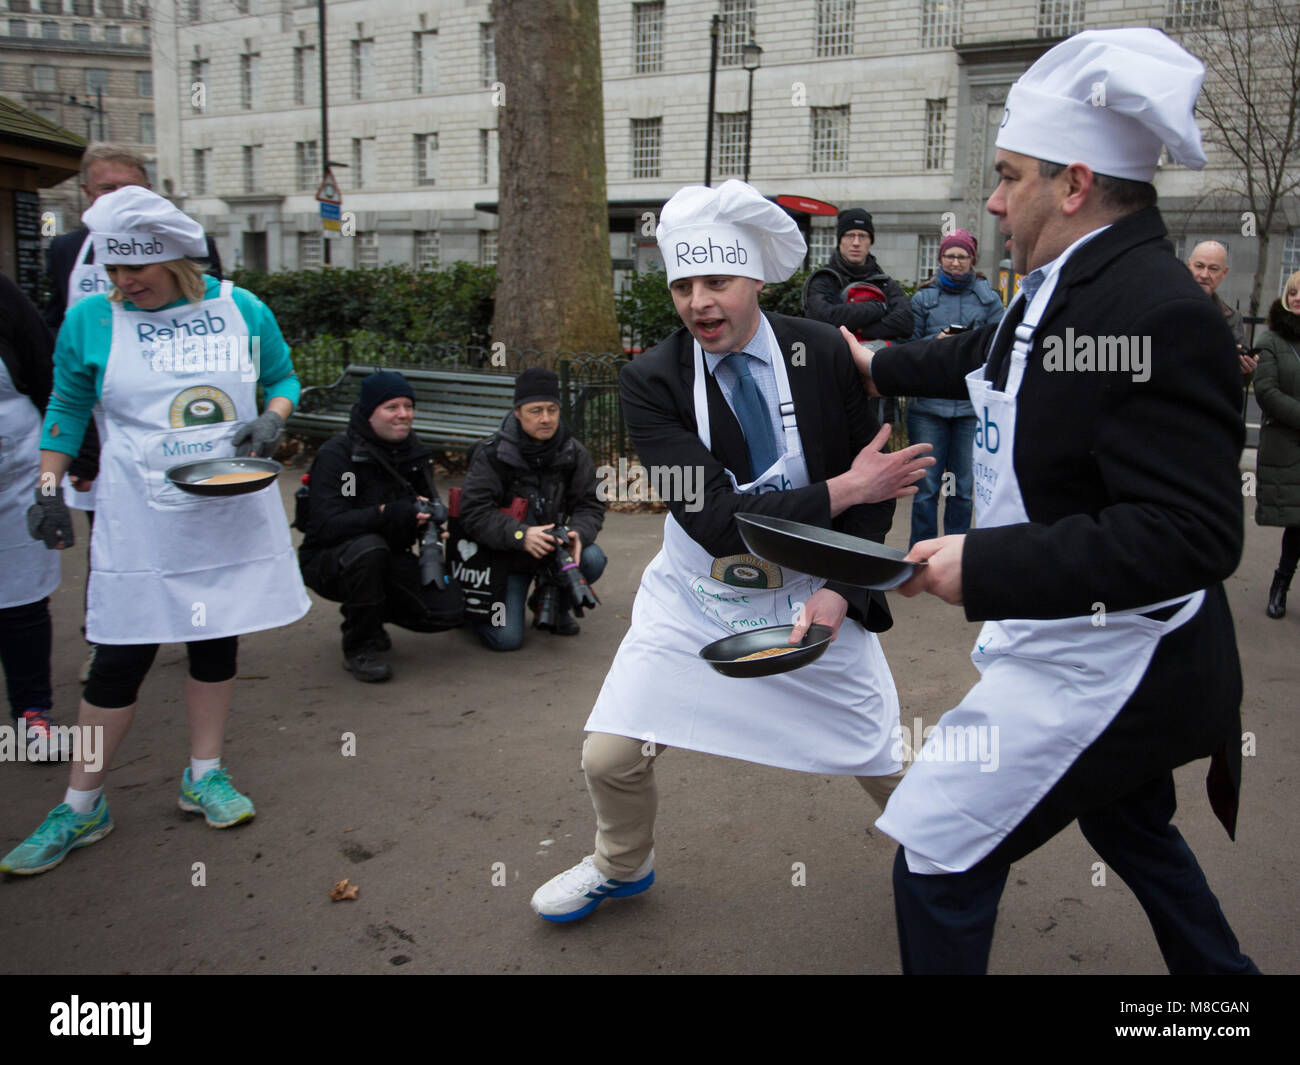 The 21st annual Rehab Parliamentary Pancake Race, supported by Lyle’s Golden Syrup, between a team of MPs and media in Victoria Tower Gardens, Millbank.  Featuring: Parliamentary Team Where: London, England, United Kingdom When: 13 Feb 2018 Credit: Wheatley/WENN Stock Photo